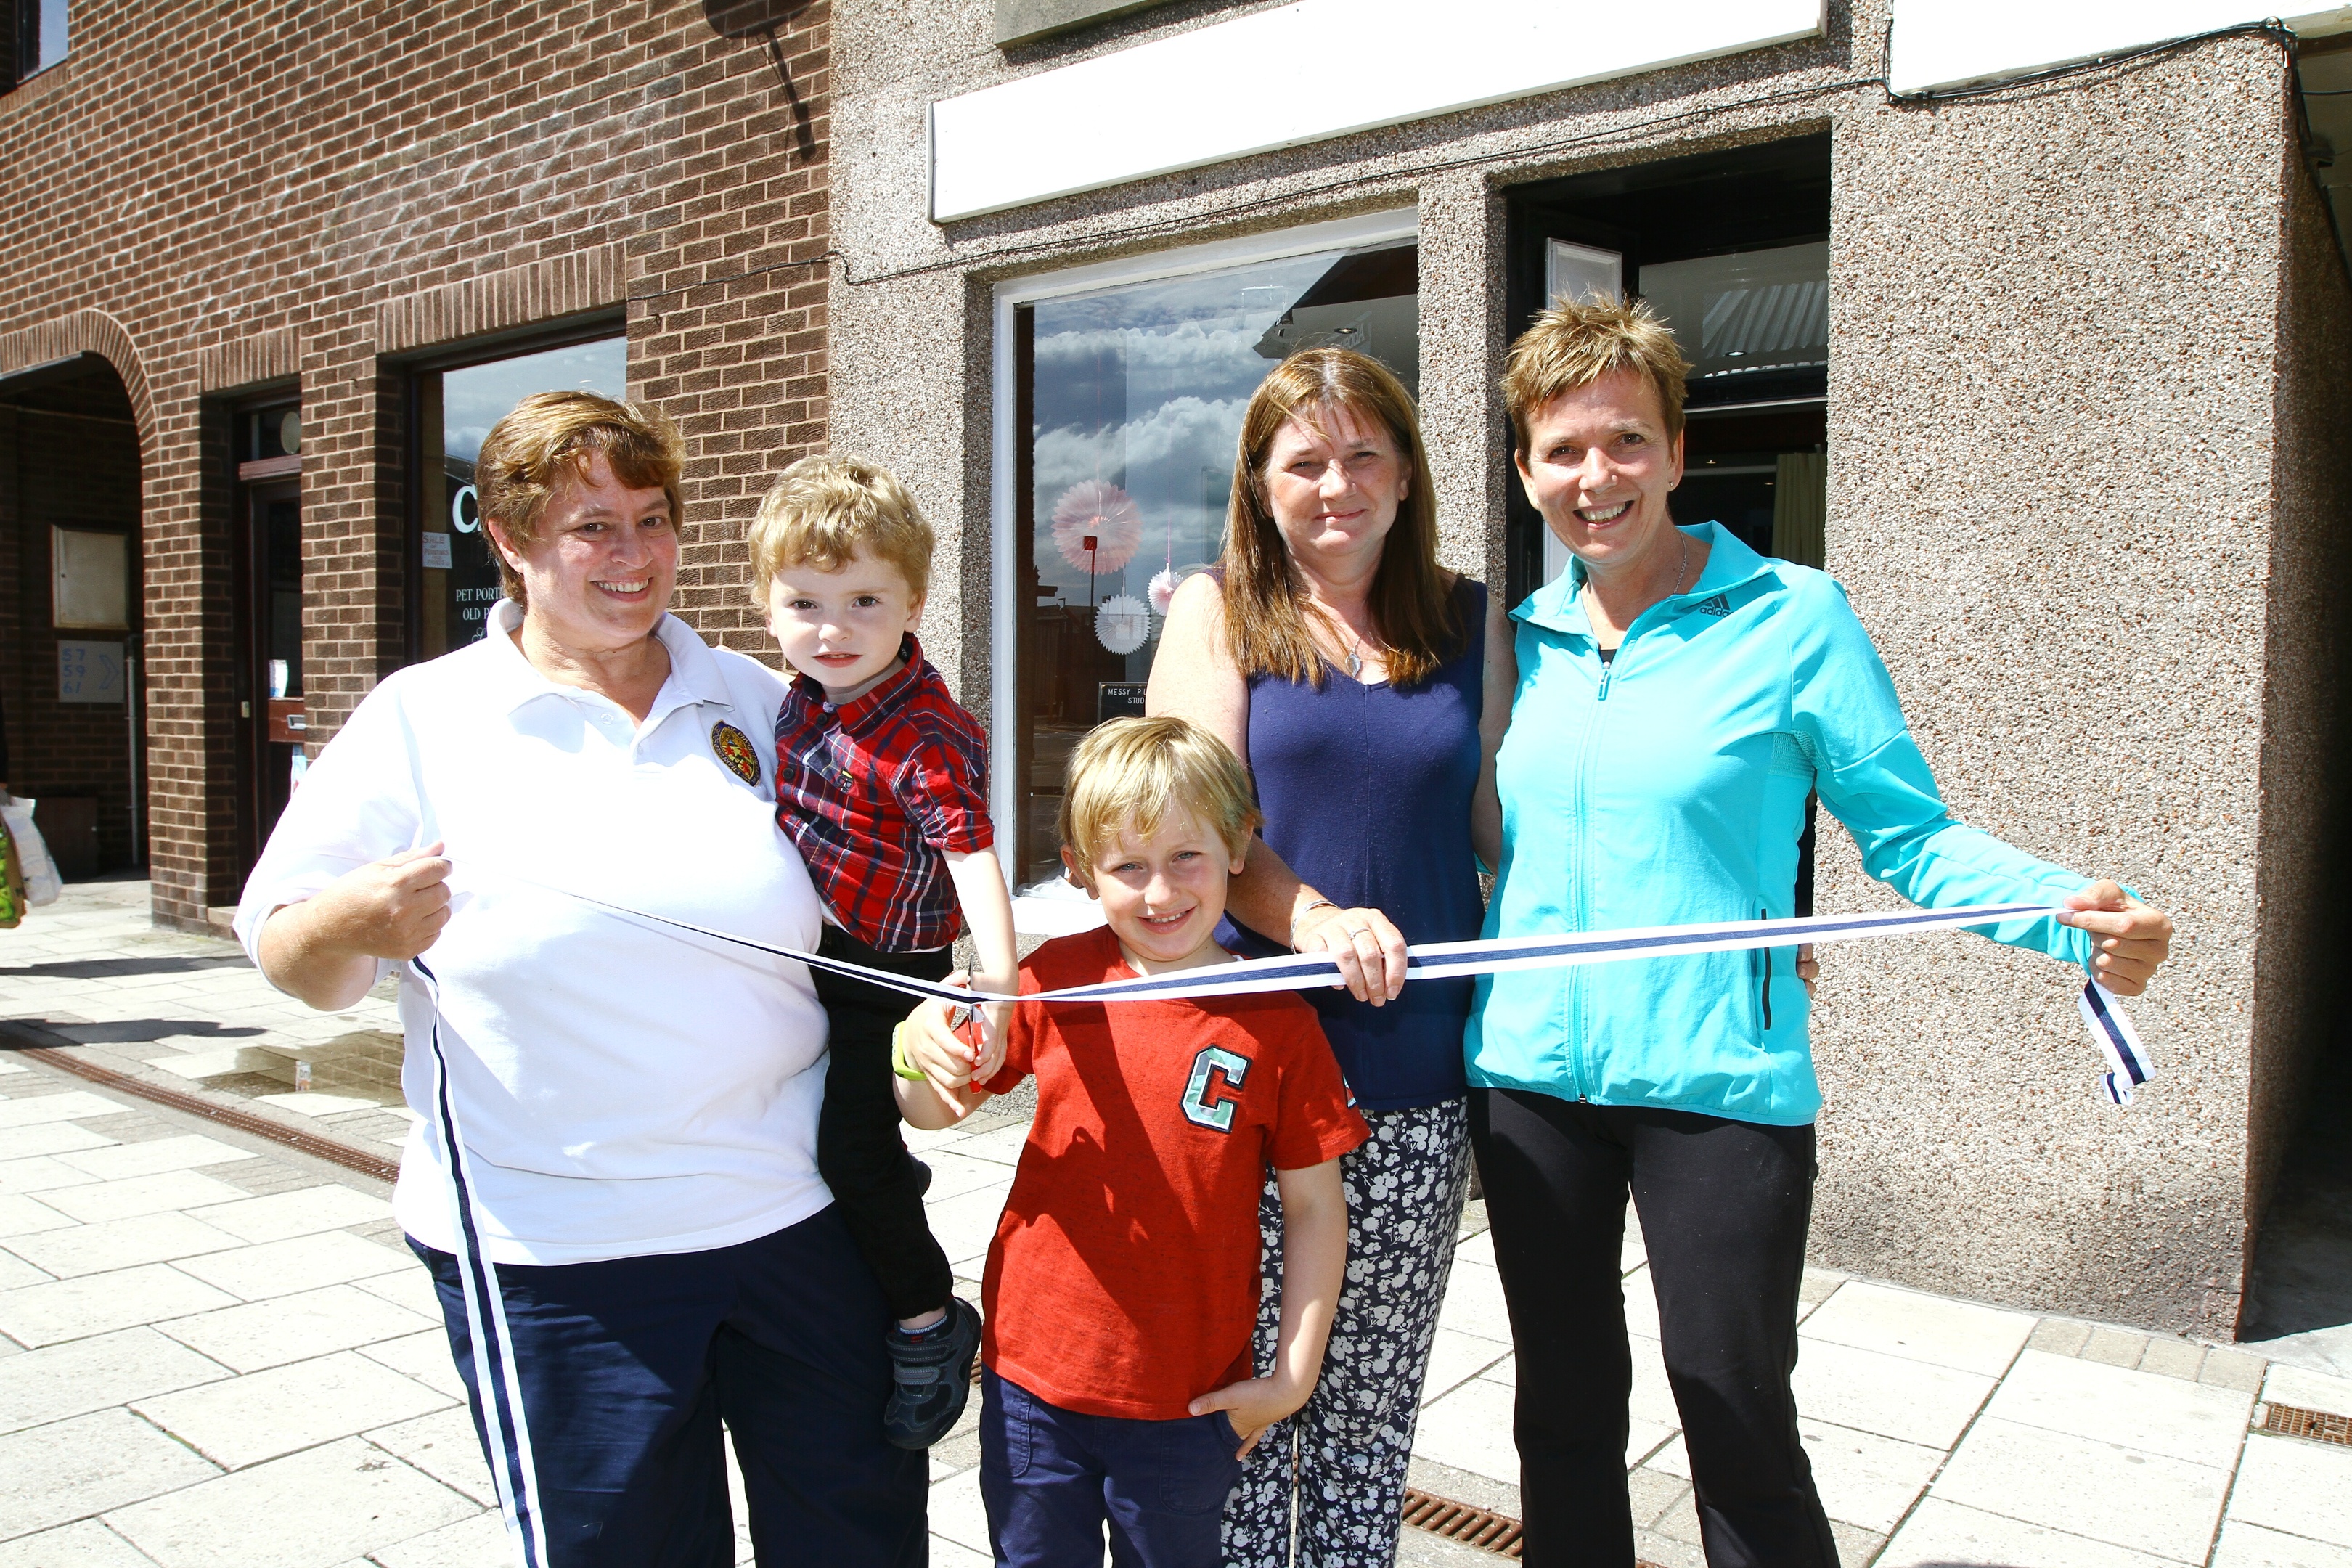 From left, Cath Spink, Noah Spink, Nathan Milne, Alison Smith, Jane Torvaney.